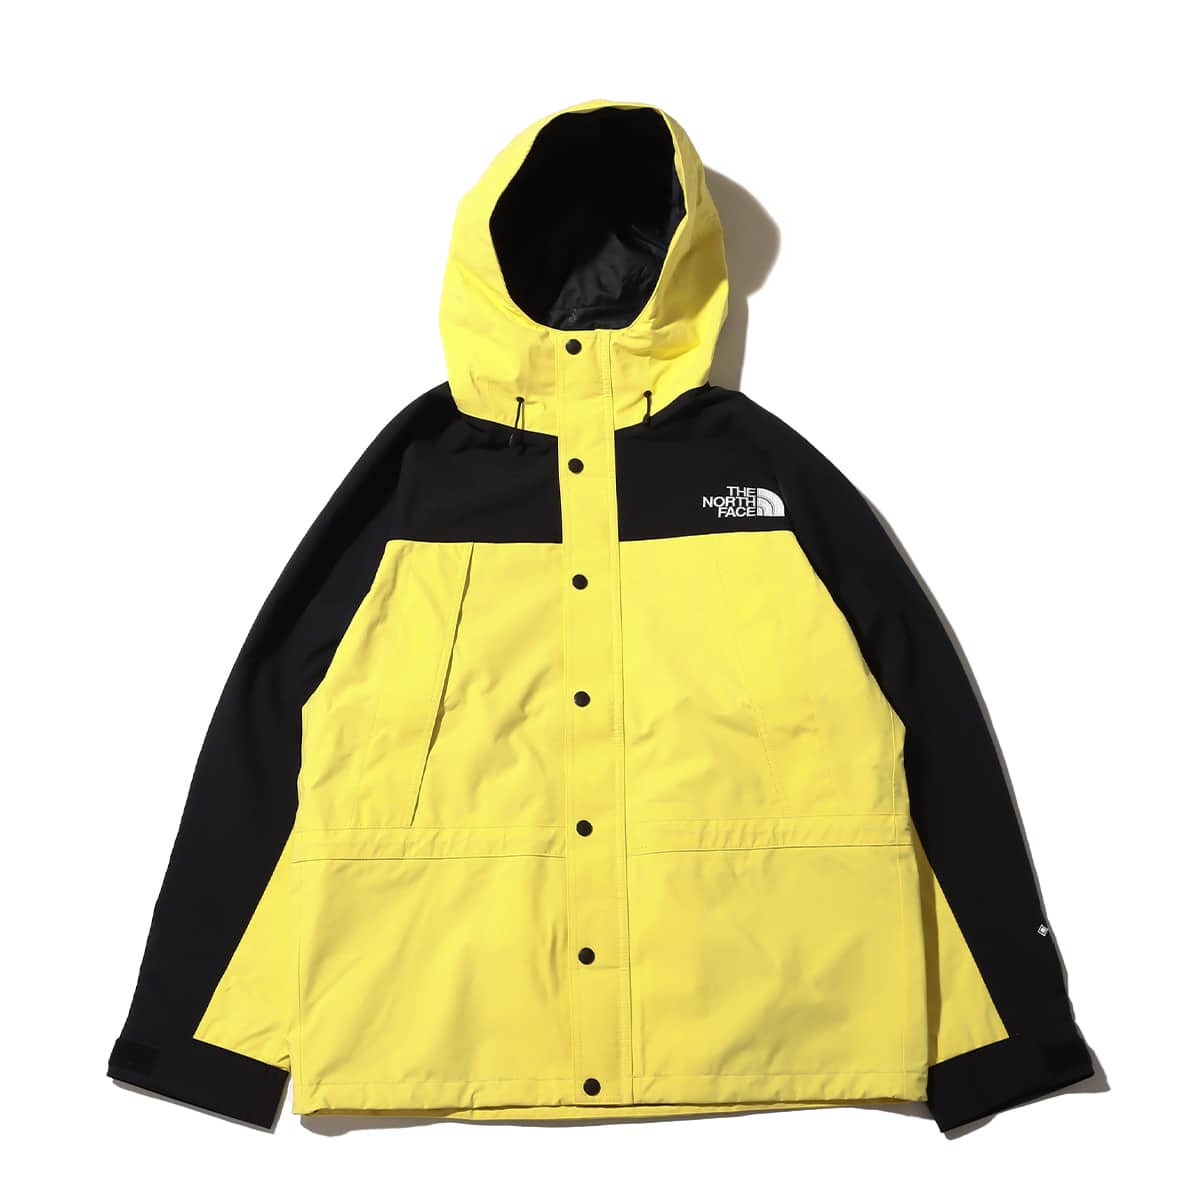 THE NORTH FACE MOUNTAIN LIGHT JACKET イエローテール 22FW-I